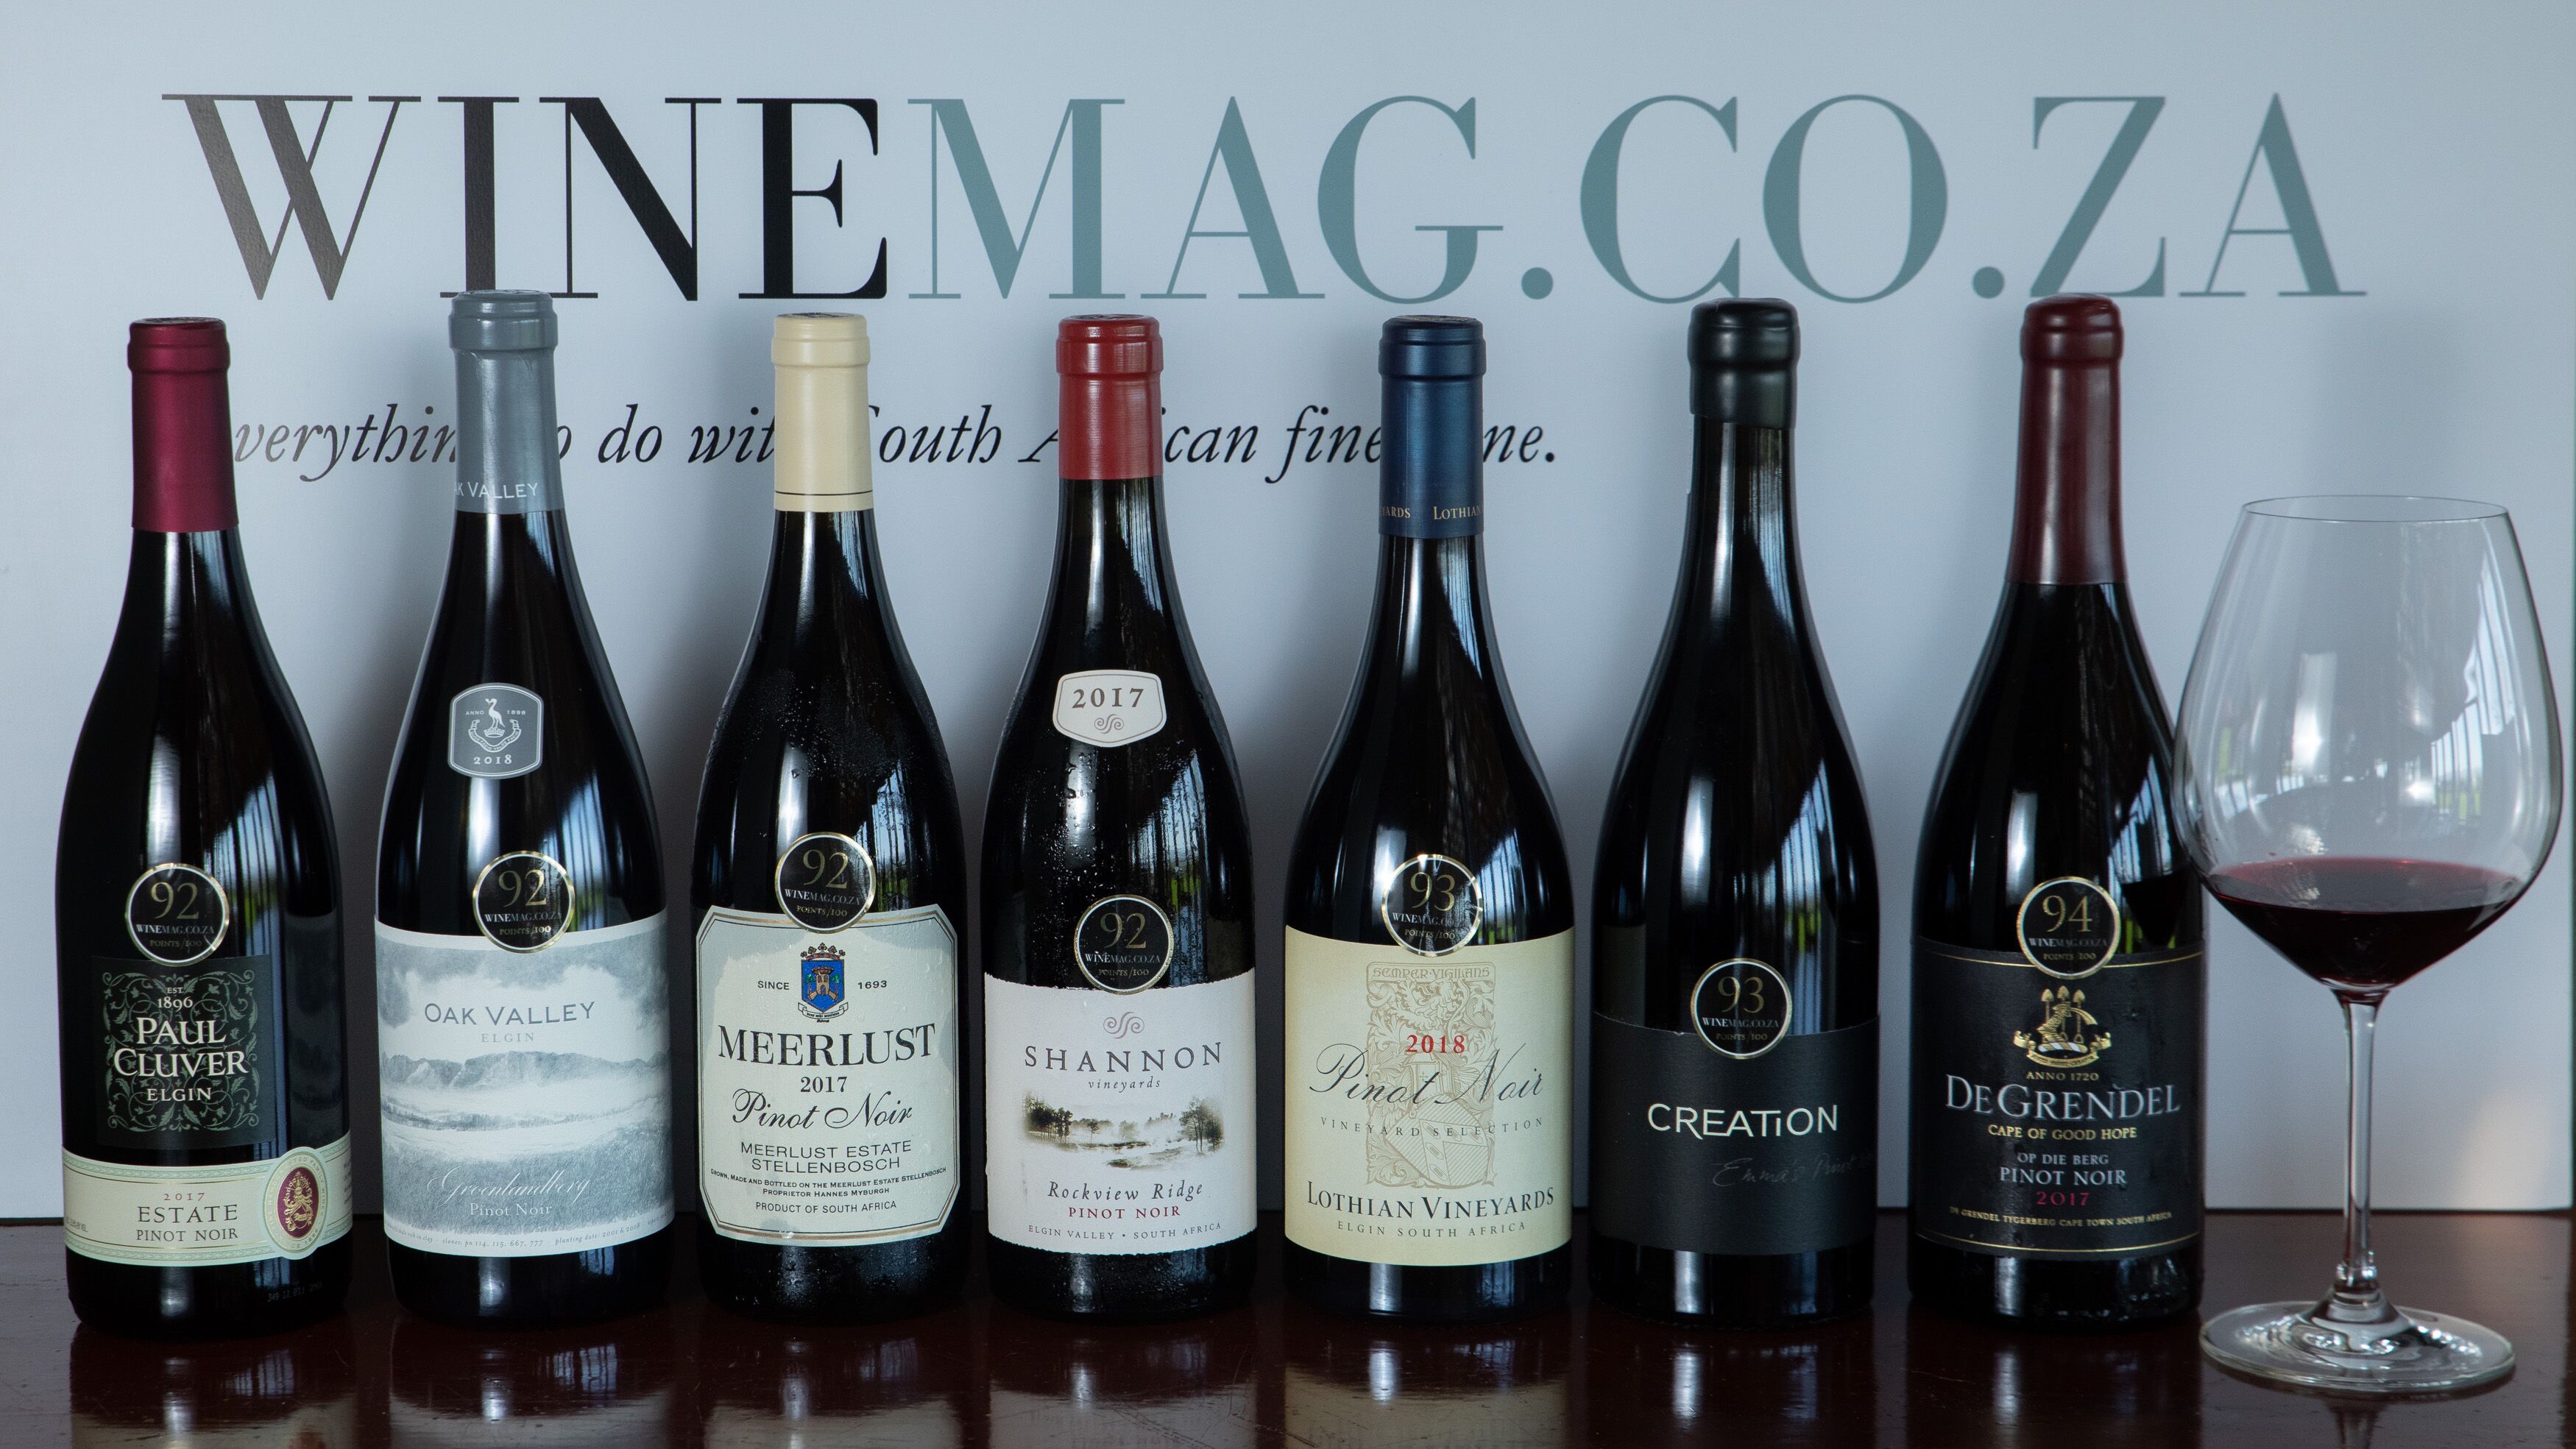 The Magnificent Seven: Top Wines in the Tonnellerie Saint Martin Pinot Noir Report 2019 announced photo